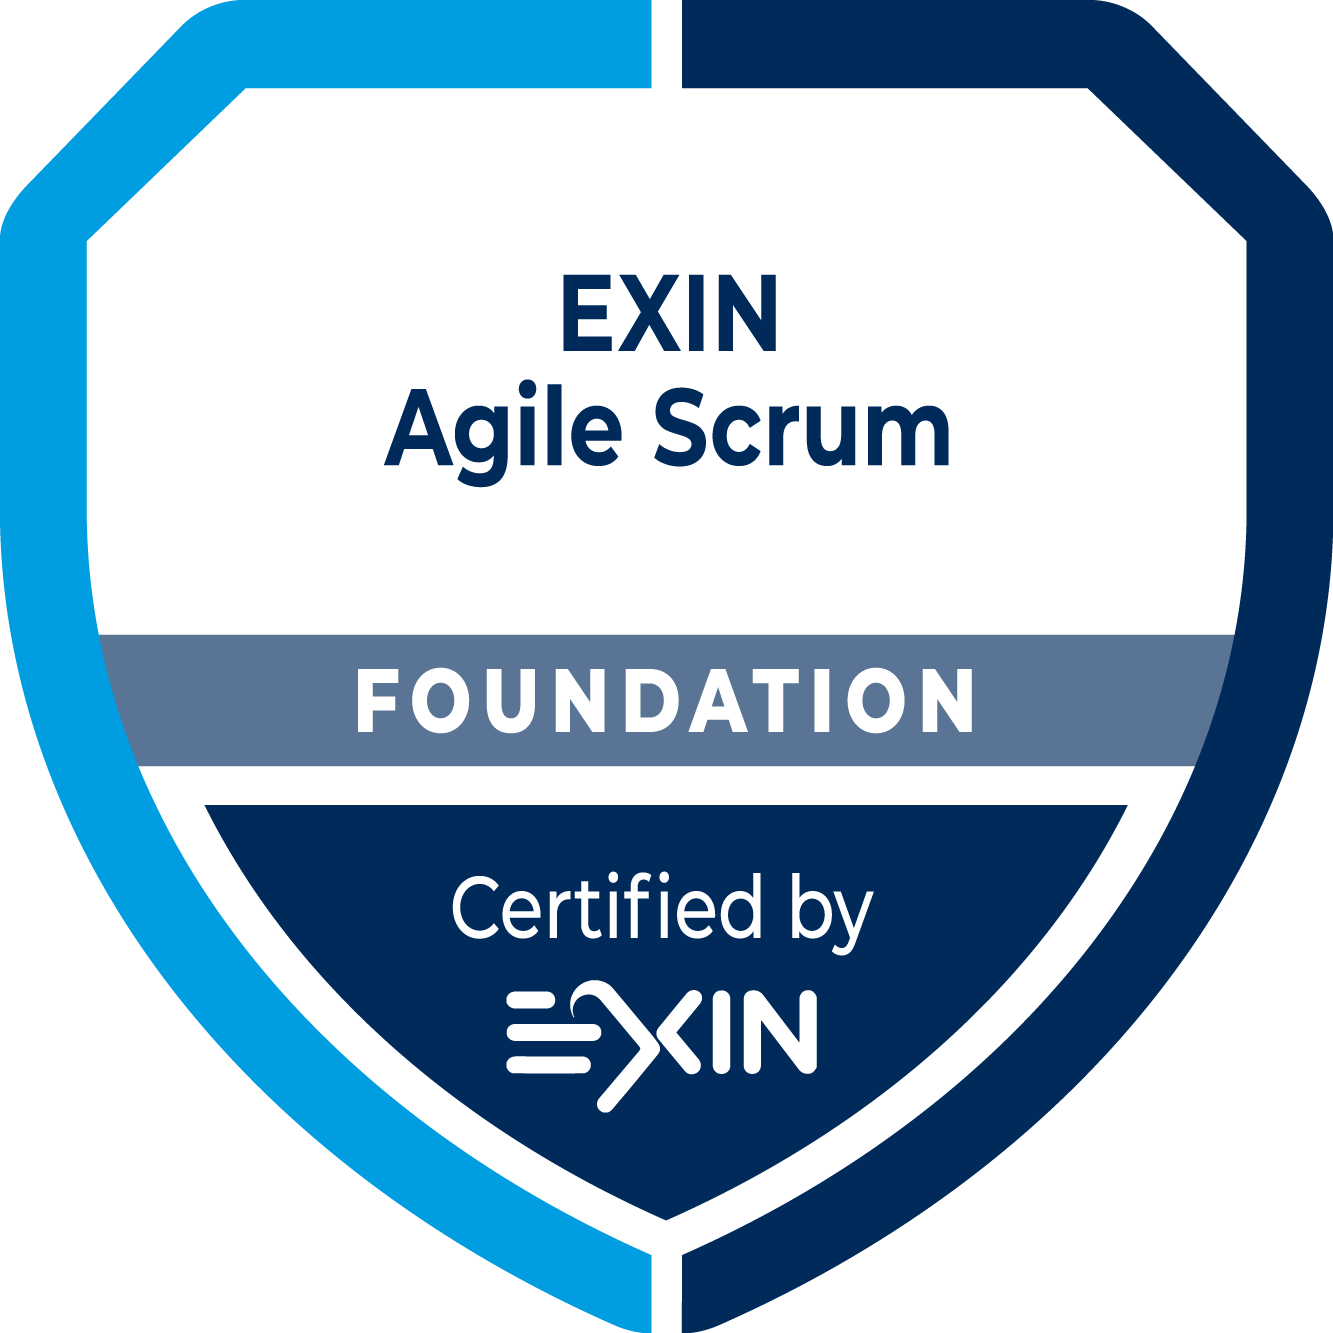 exin_agile_scrum.png